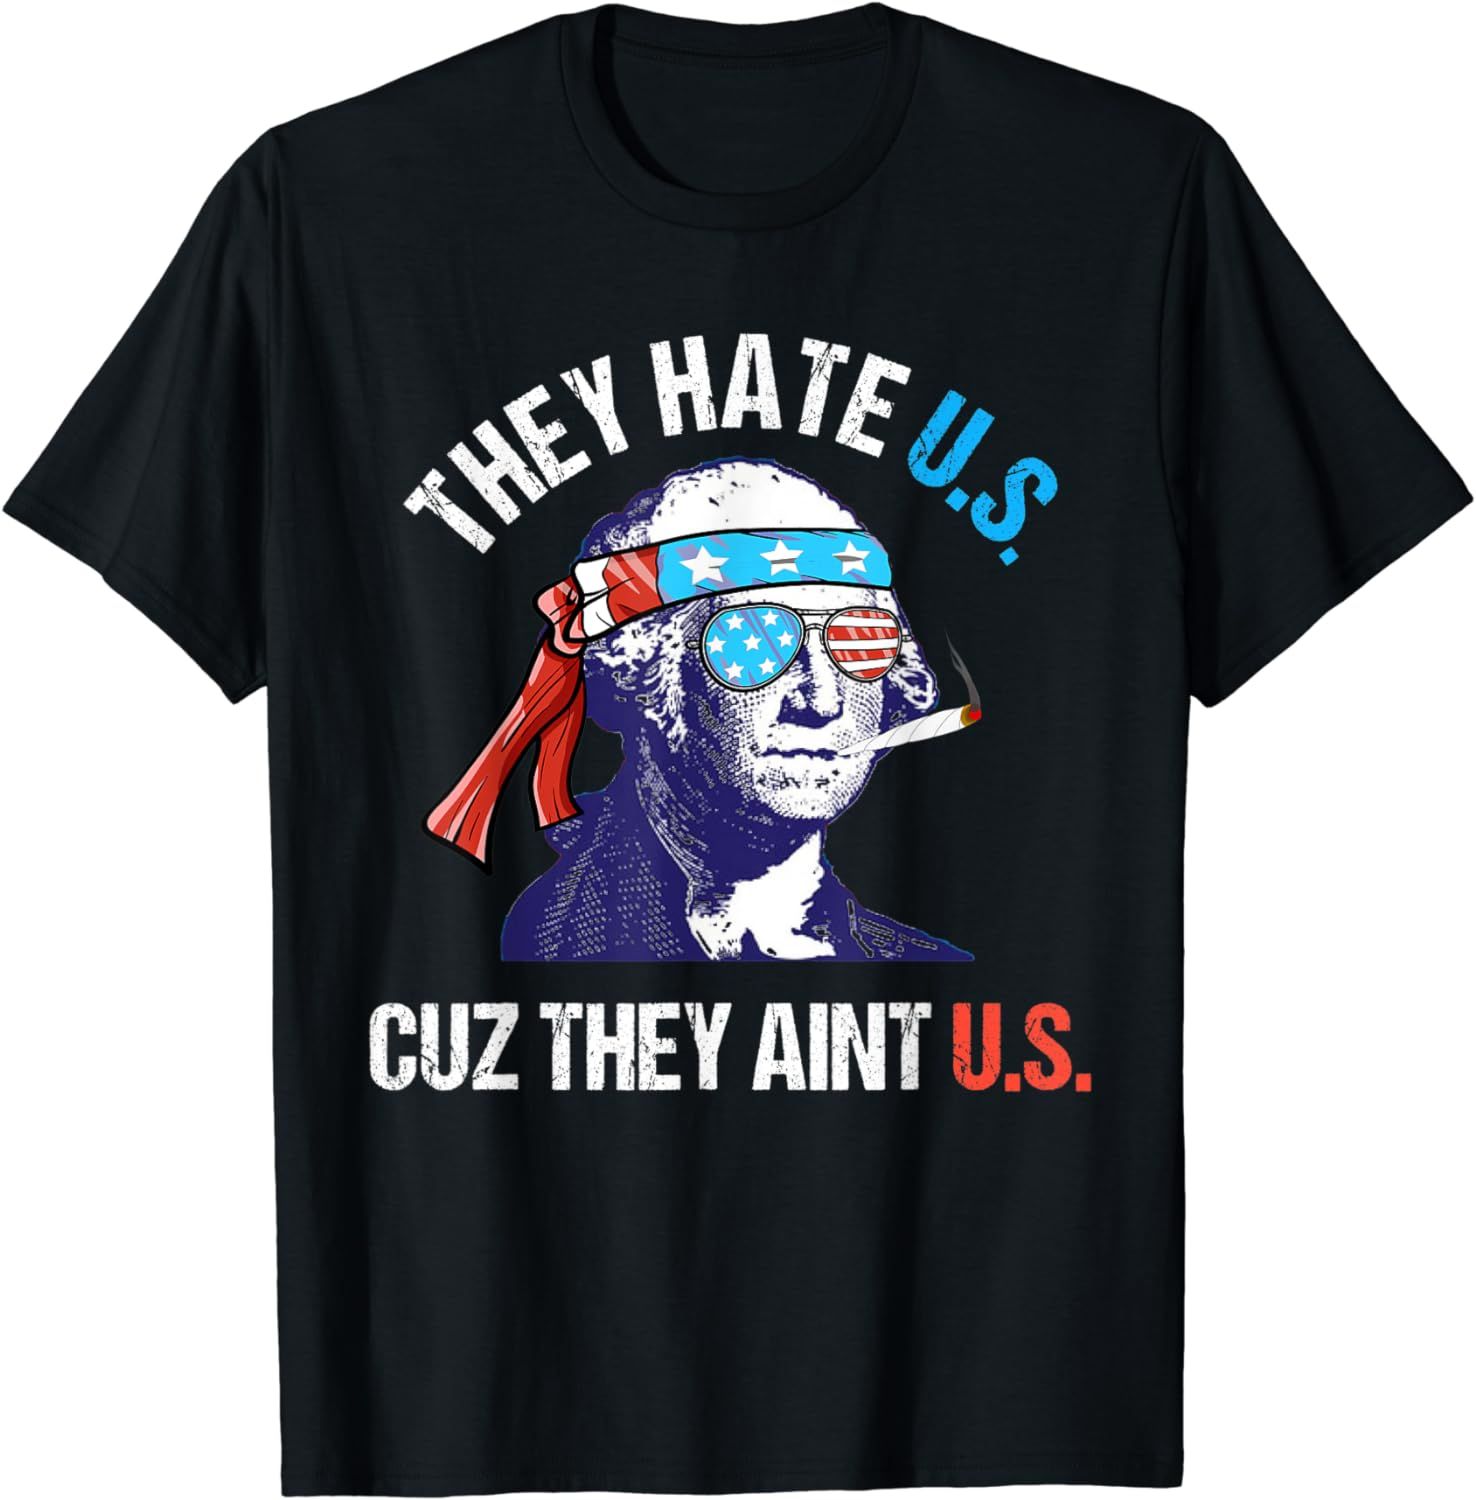 They Hate Us Cuz They Ain't Us Funny 4th of July T-Shirt | Amazon (US)